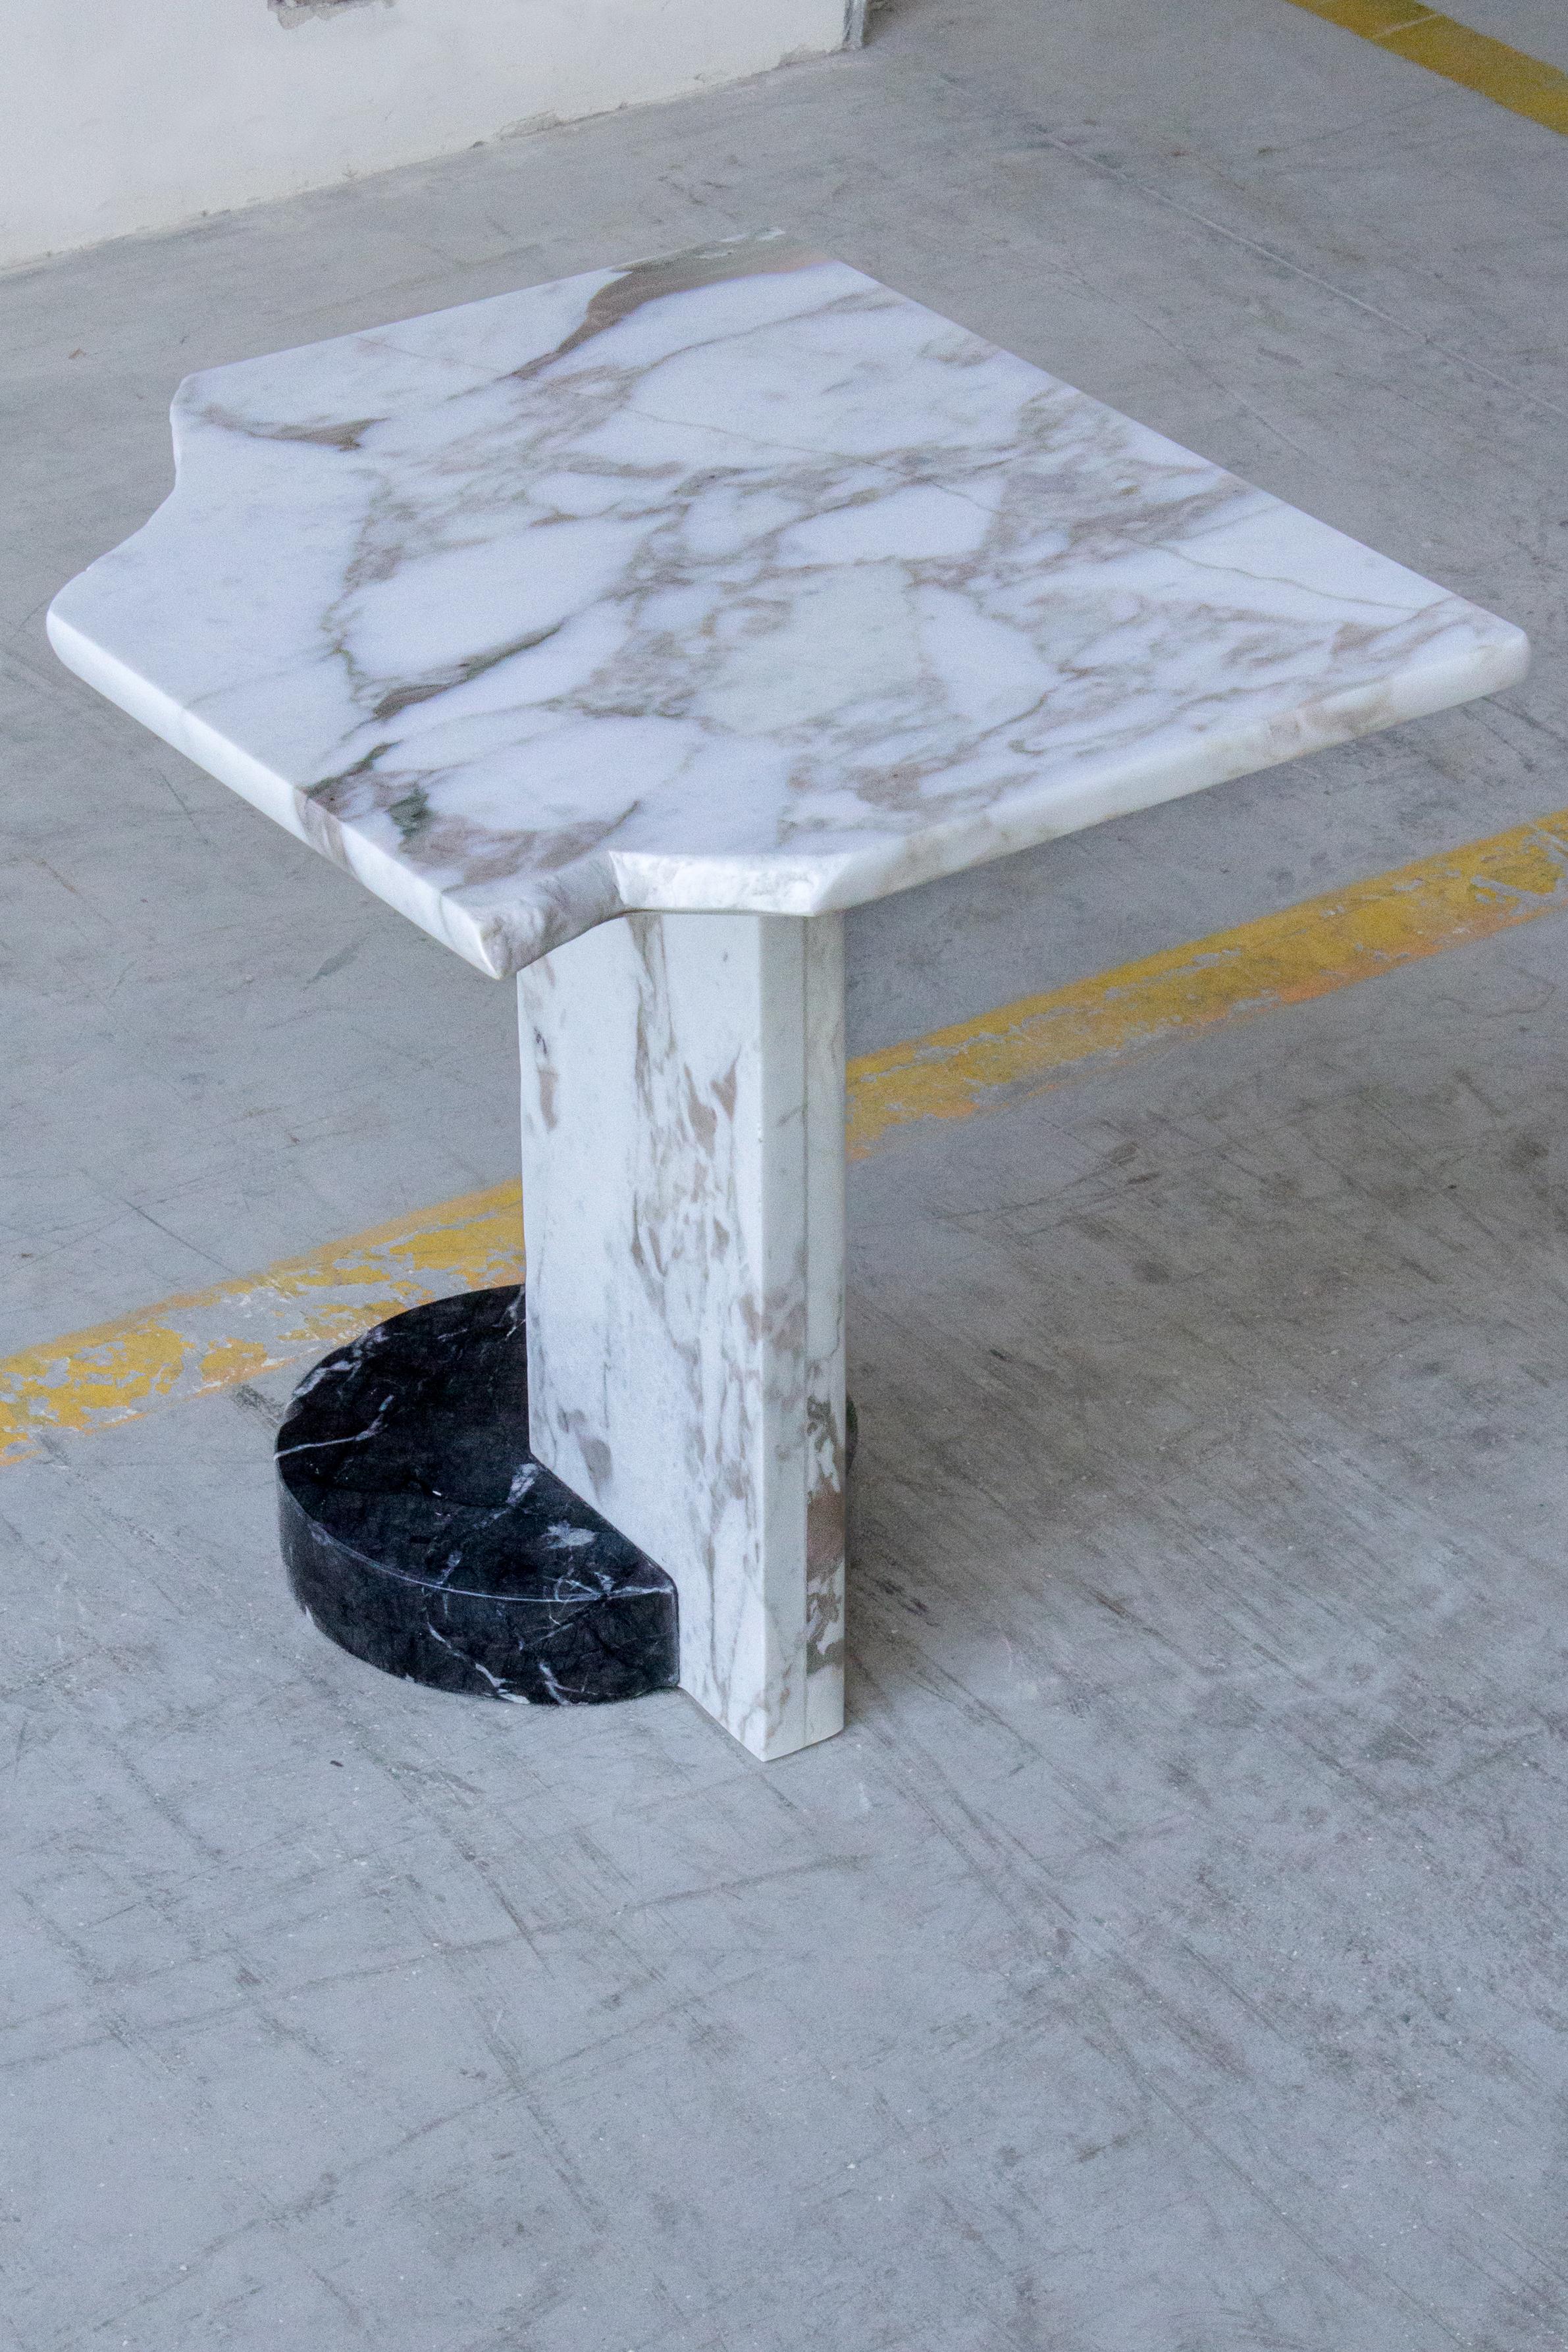 SST022 side table by Stone Stackers
Dimensions: D 45 x W 50 x H 52 cm
Materials: Calacatta Oro marble, Marquina marble.
Marble Structure: Calacatta Oro
Marble Base: Marquina
Weight: 30 kg

The side table combines two sleek marble slabs and an